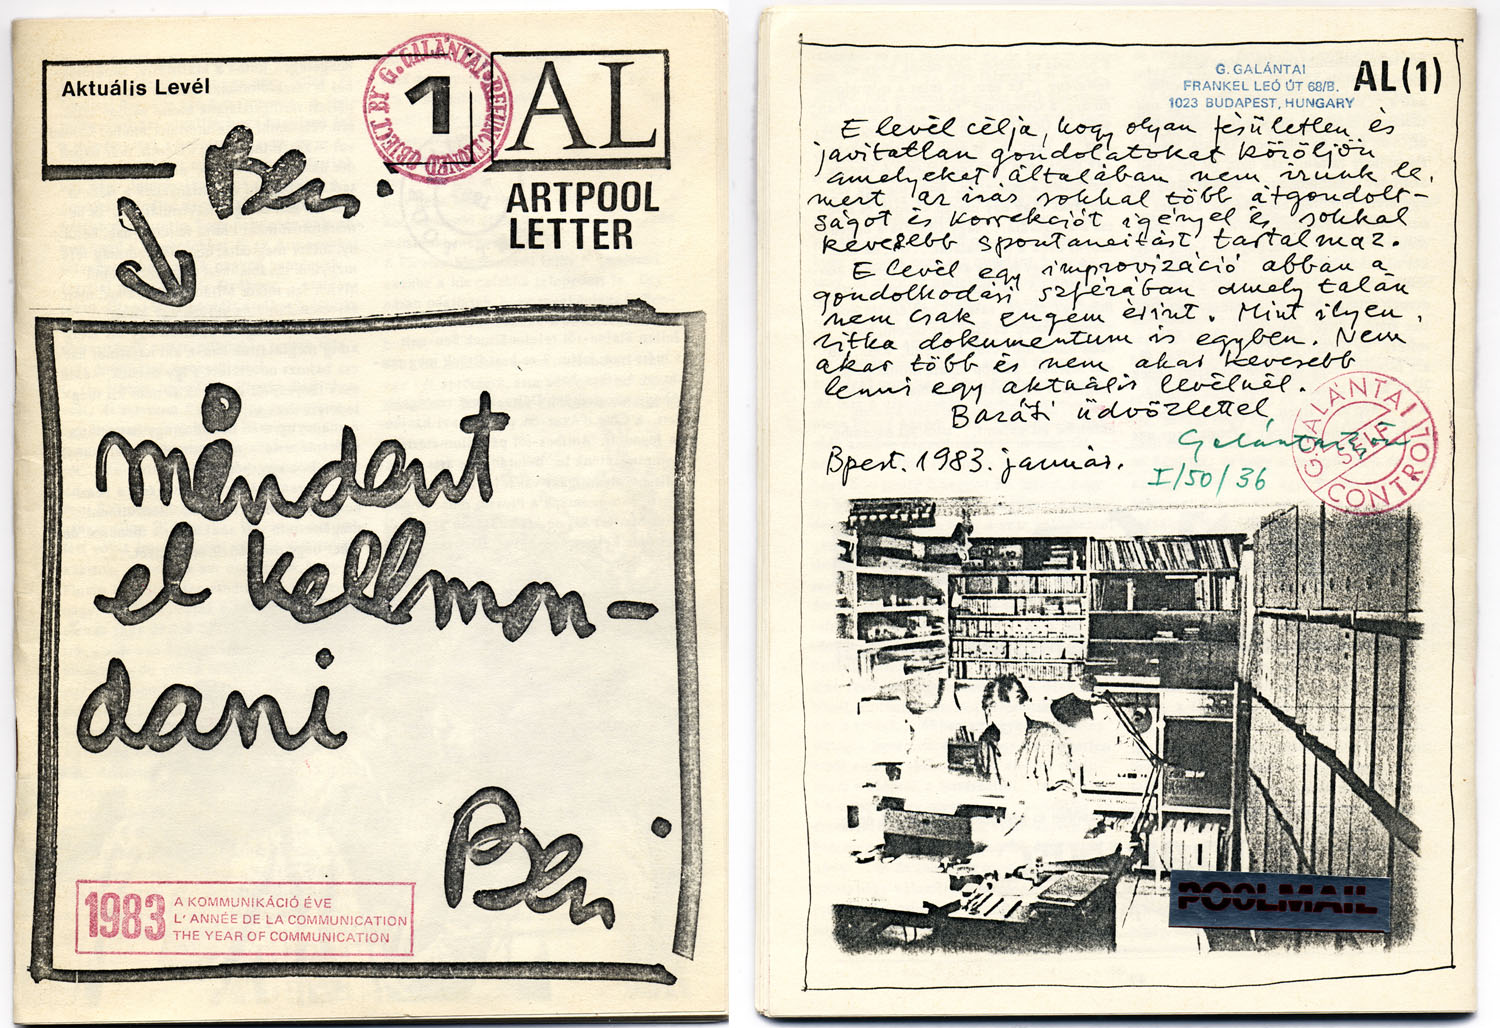 Cover (front and back) of AL 1, January 1983 (the first issue of the samizdat art magazine AL / Artpool Letter).